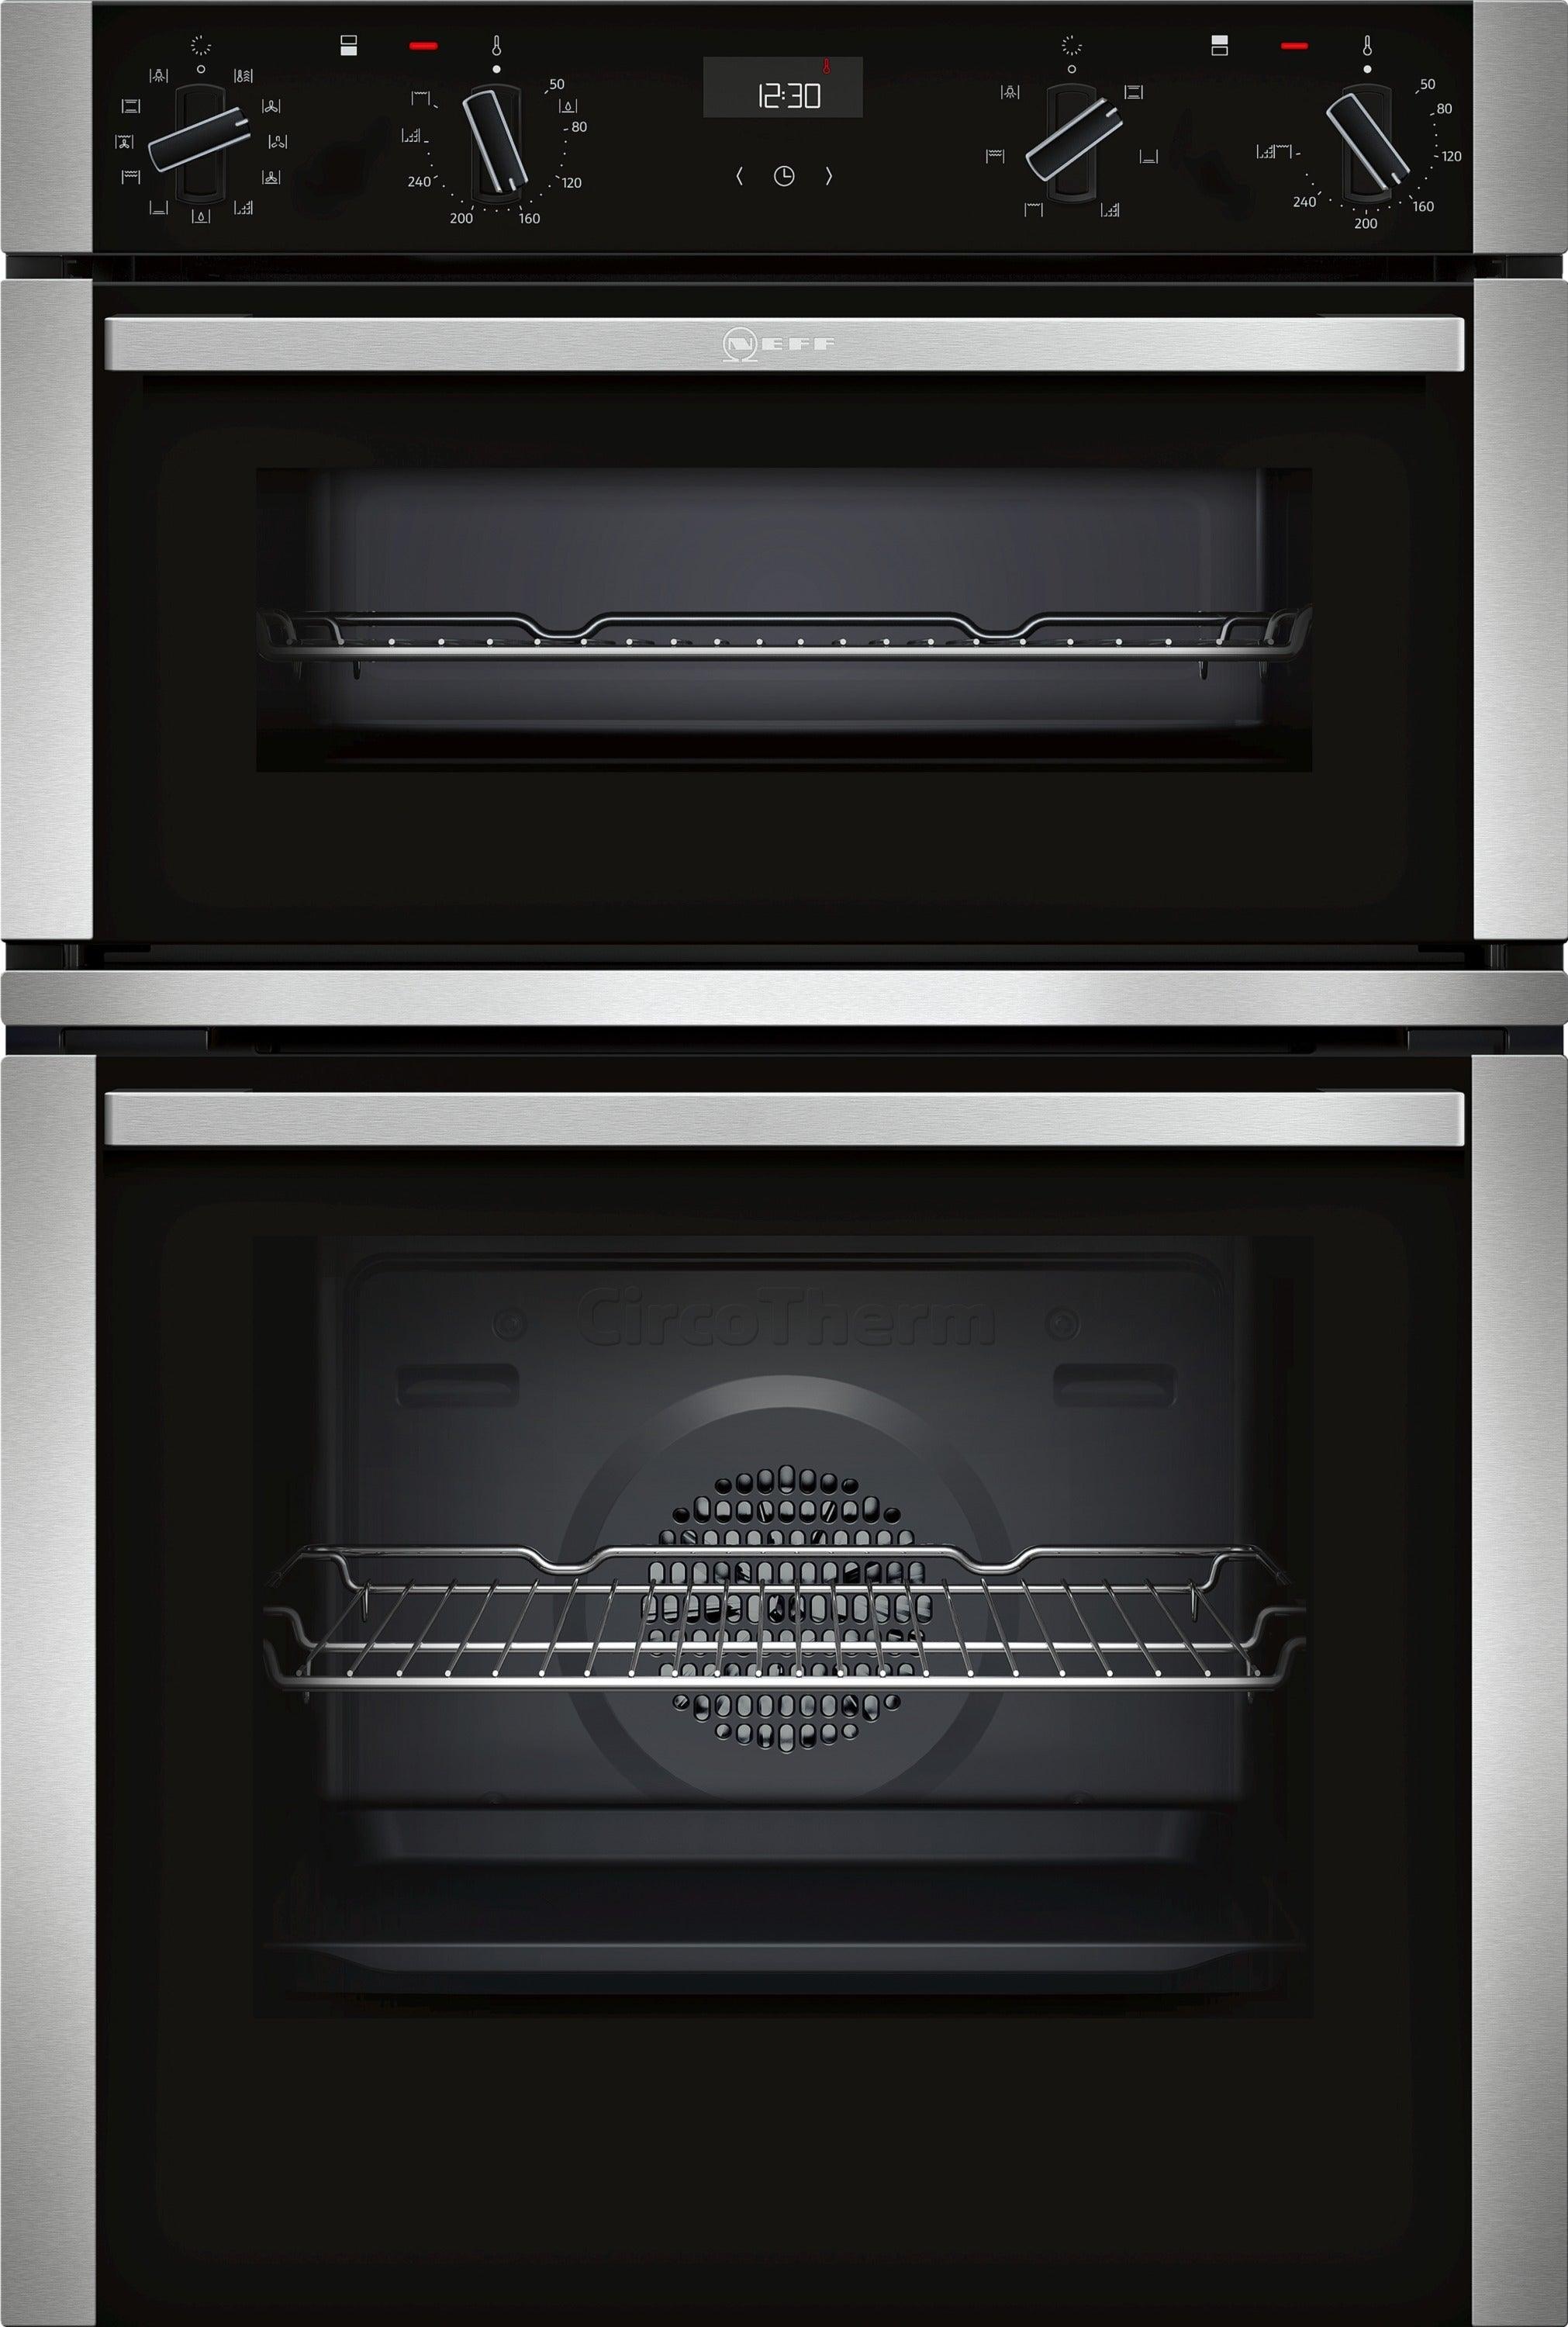 Neff Built-In Electric Double Oven with CircoTherm - Black | U1ACE5HN0B - Peter Murphy Lighting & Electrical Ltd